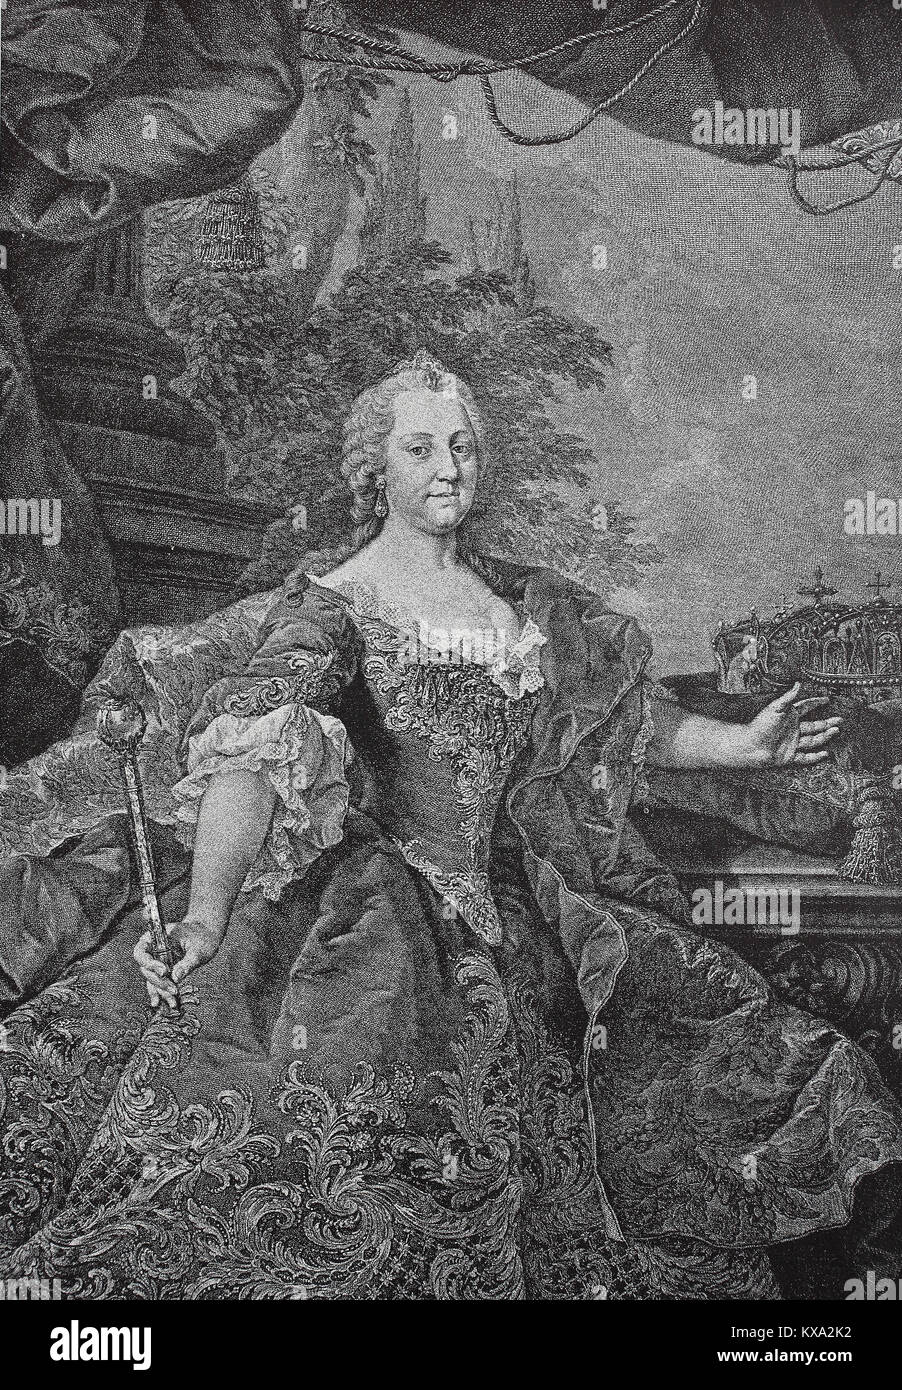 Maria Theresa Walburga Amalia Christina, 13 May 1717 - 29 November 1780, was the only female ruler of the Habsburg dominions and the last of the House of Habsburg. She was the sovereign of Austria, Hungary, Croatia, Bohemia, Transylvania, Mantua, Milan, Lodomeria and Galicia, the Austrian Netherlands and Parma. By marriage, she was Duchess of Lorraine, Grand Duchess of Tuscany and Holy Roman Empress, digital improved reproduction from an original woodcut or illustration from the year 1880 Stock Photo